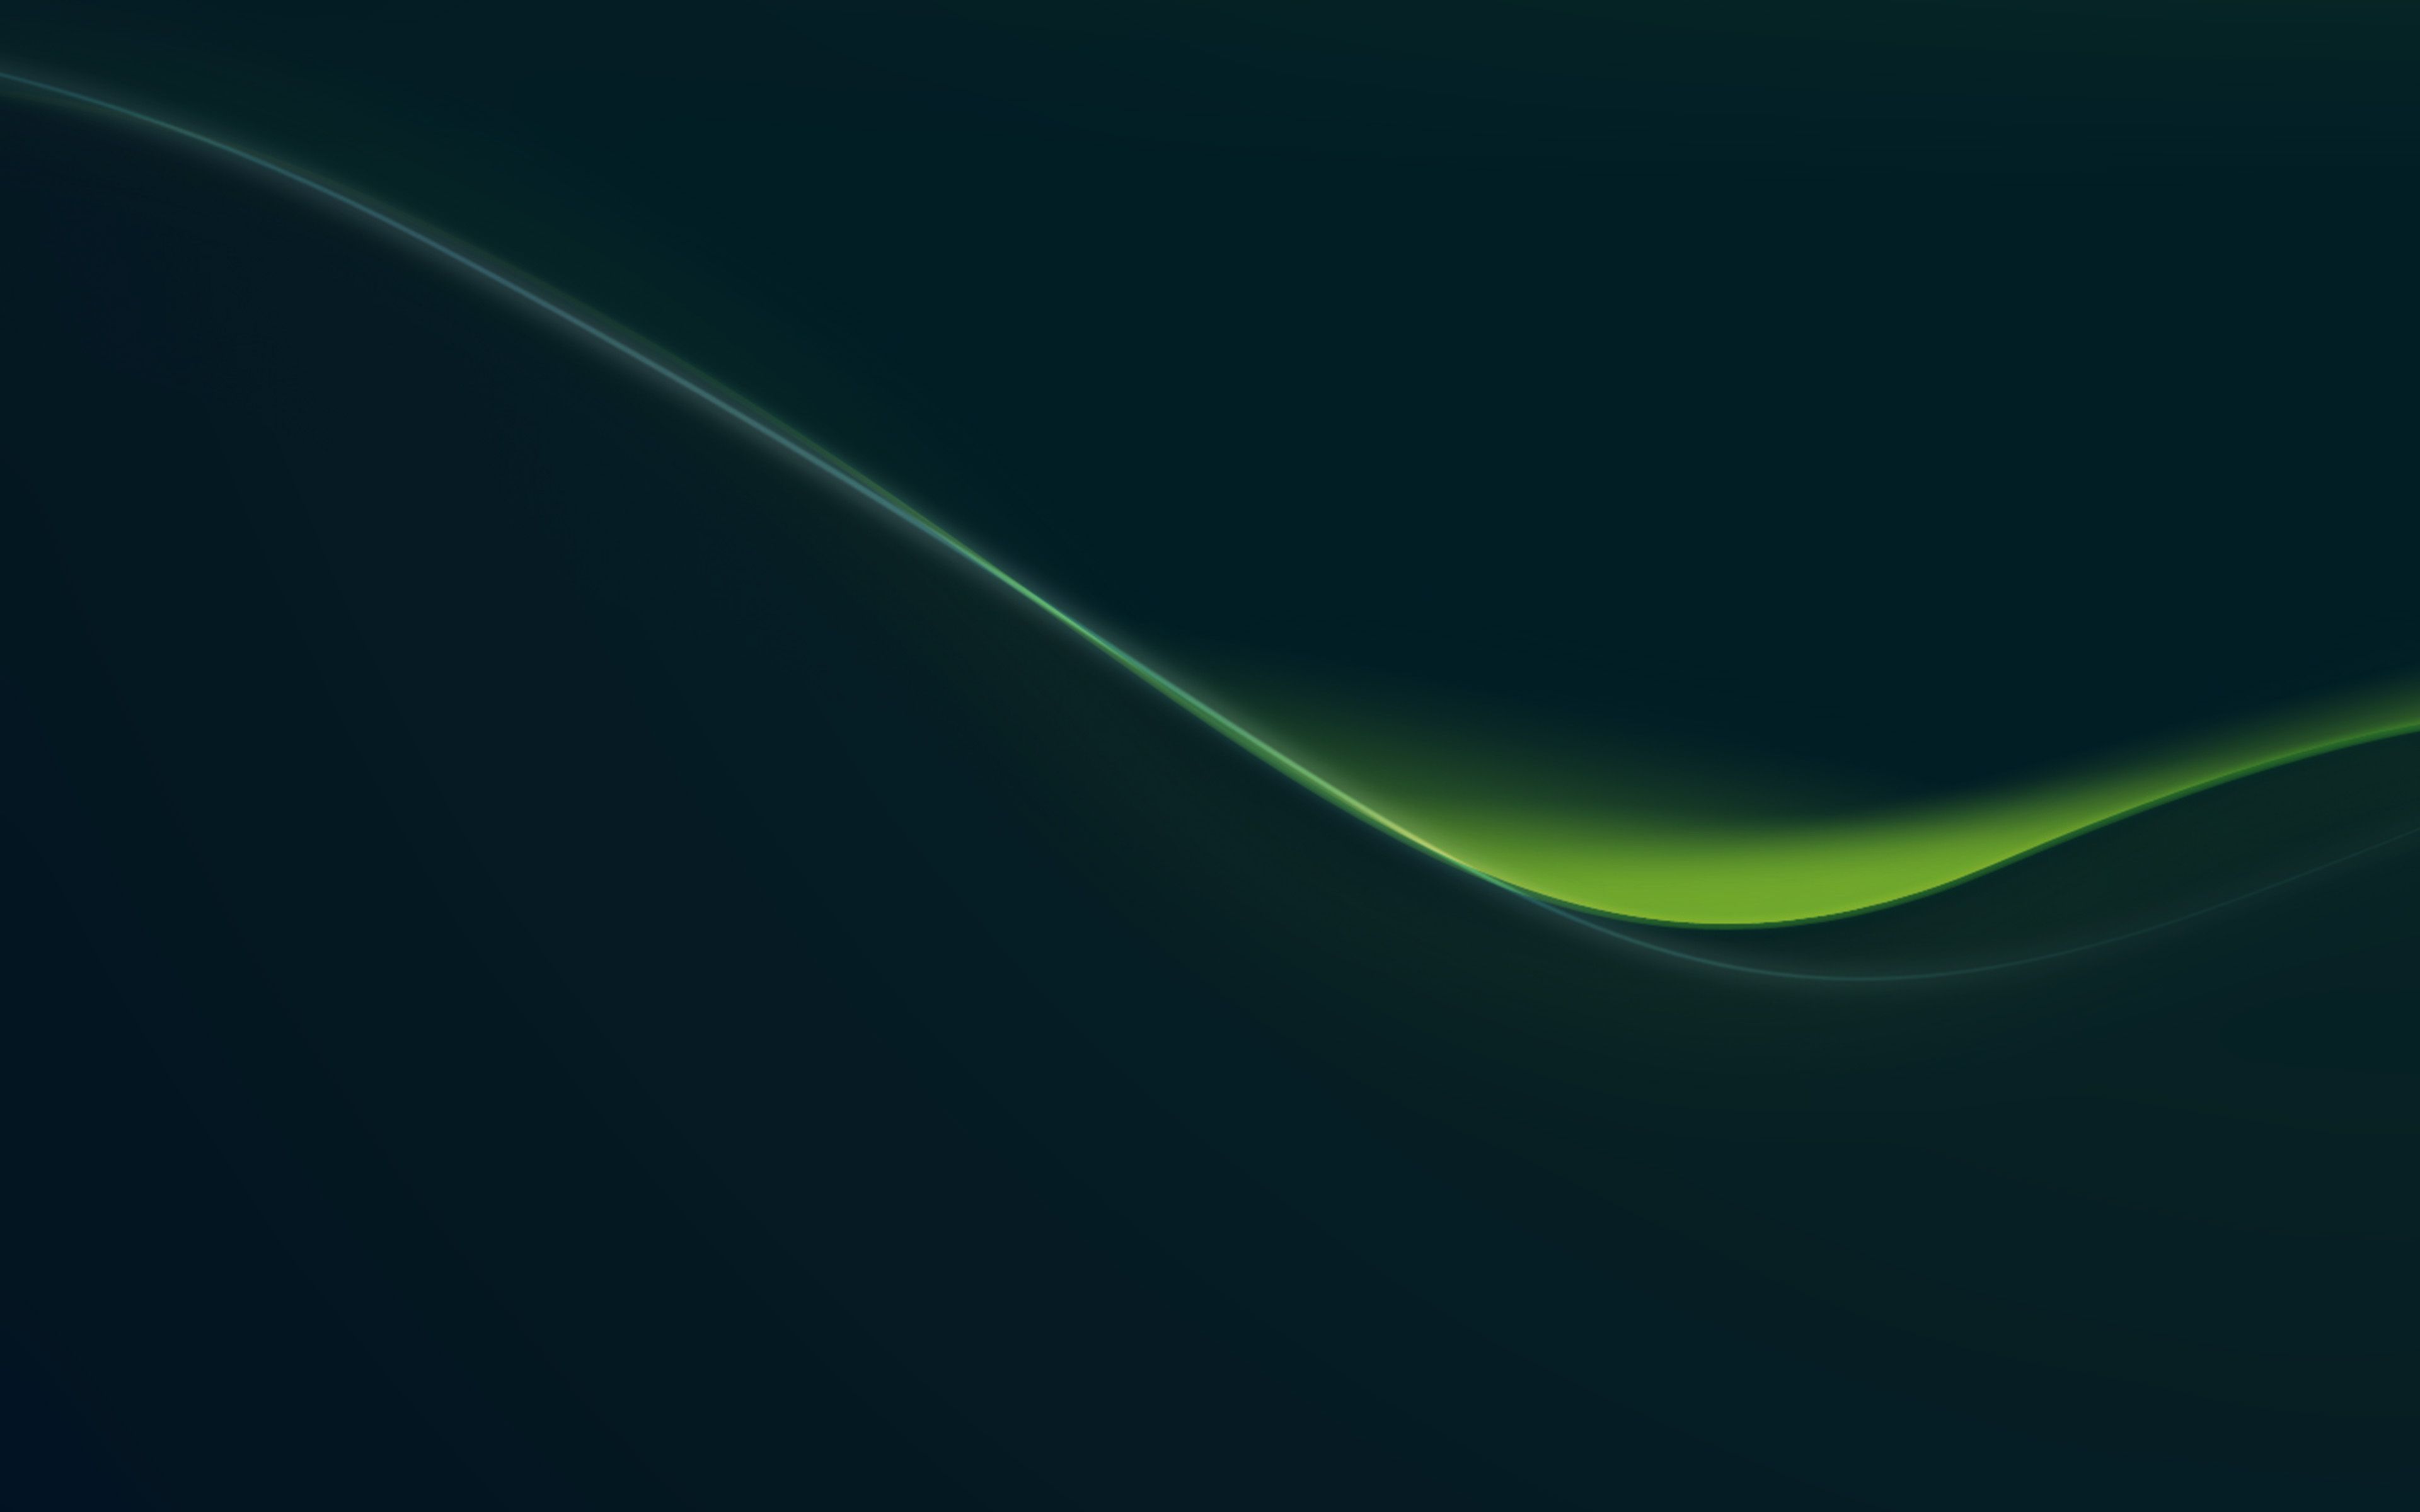 4K Green And Black Pc Wallpapers - Wallpaper Cave